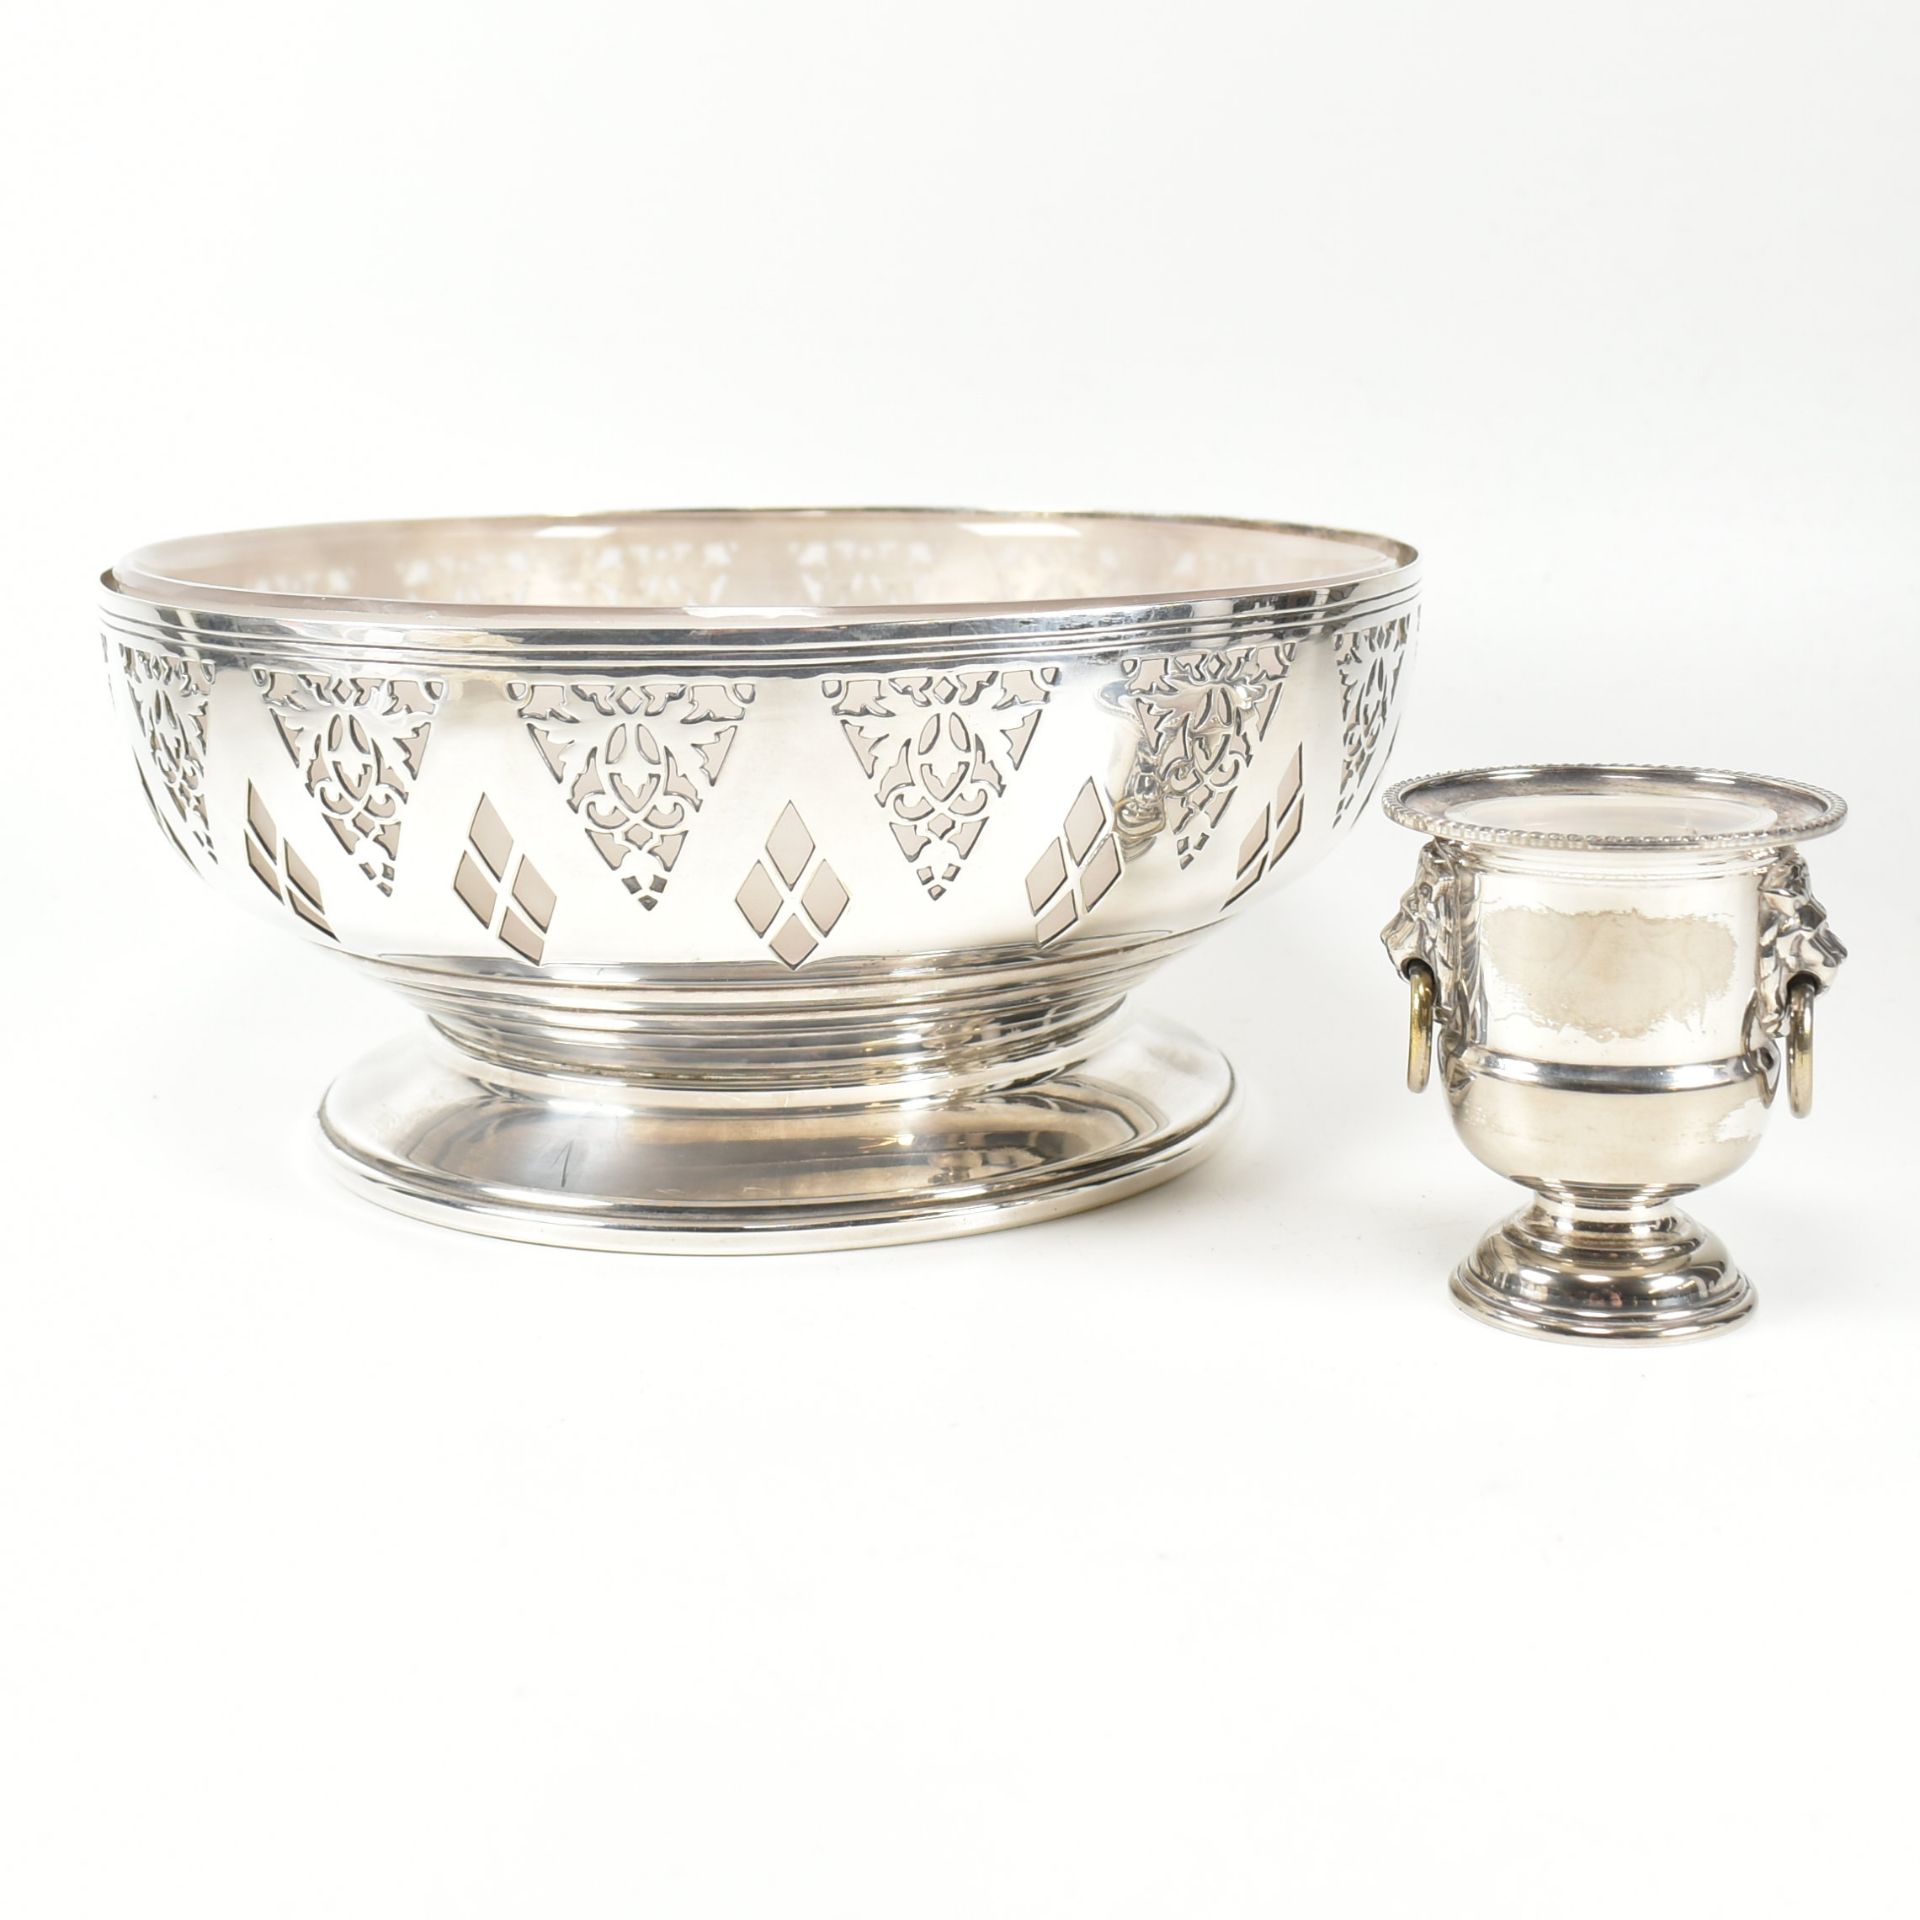 MID CENTURY MAPPIN & WEBB SILVER PLATED FRUIT BOWL & VINERS URN